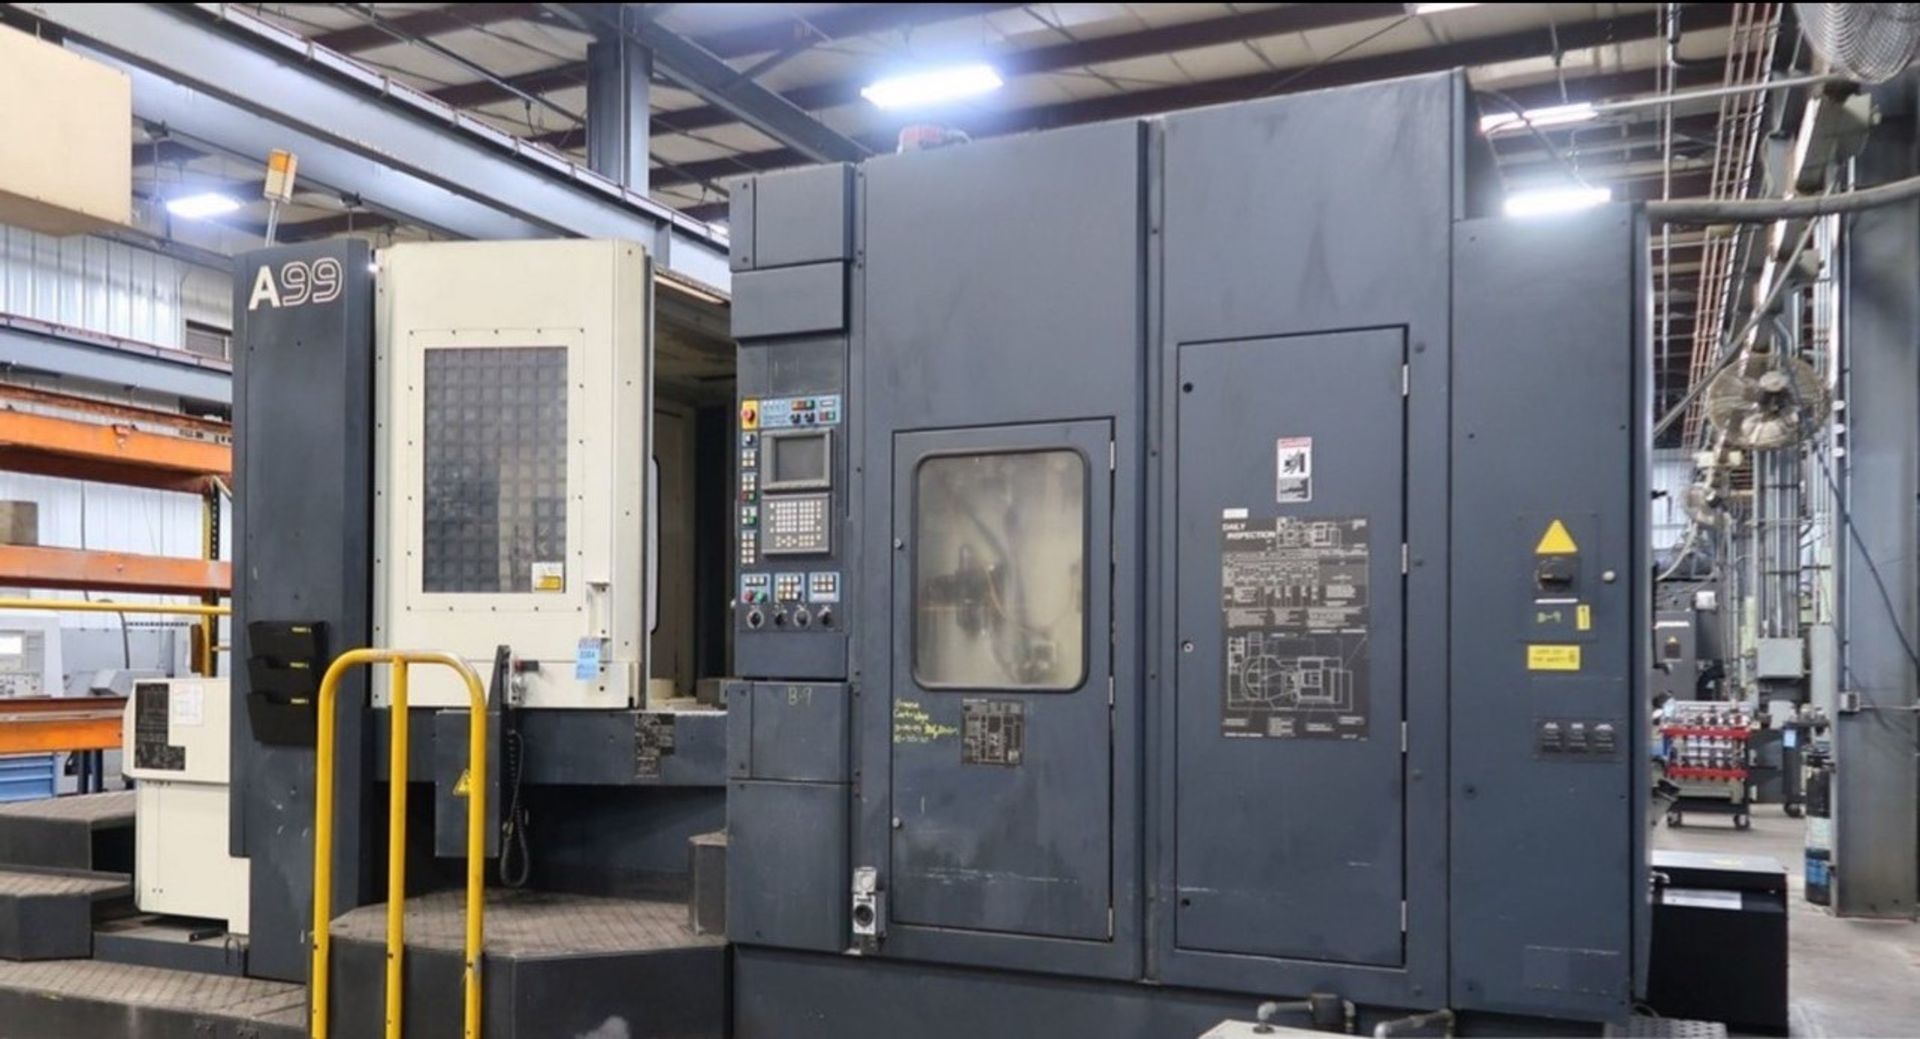 Makino A99 CNC Horizontal Machining Center w/ (2) Tombstones: Electro-Permanent Magnetic Chucks... - Image 8 of 27